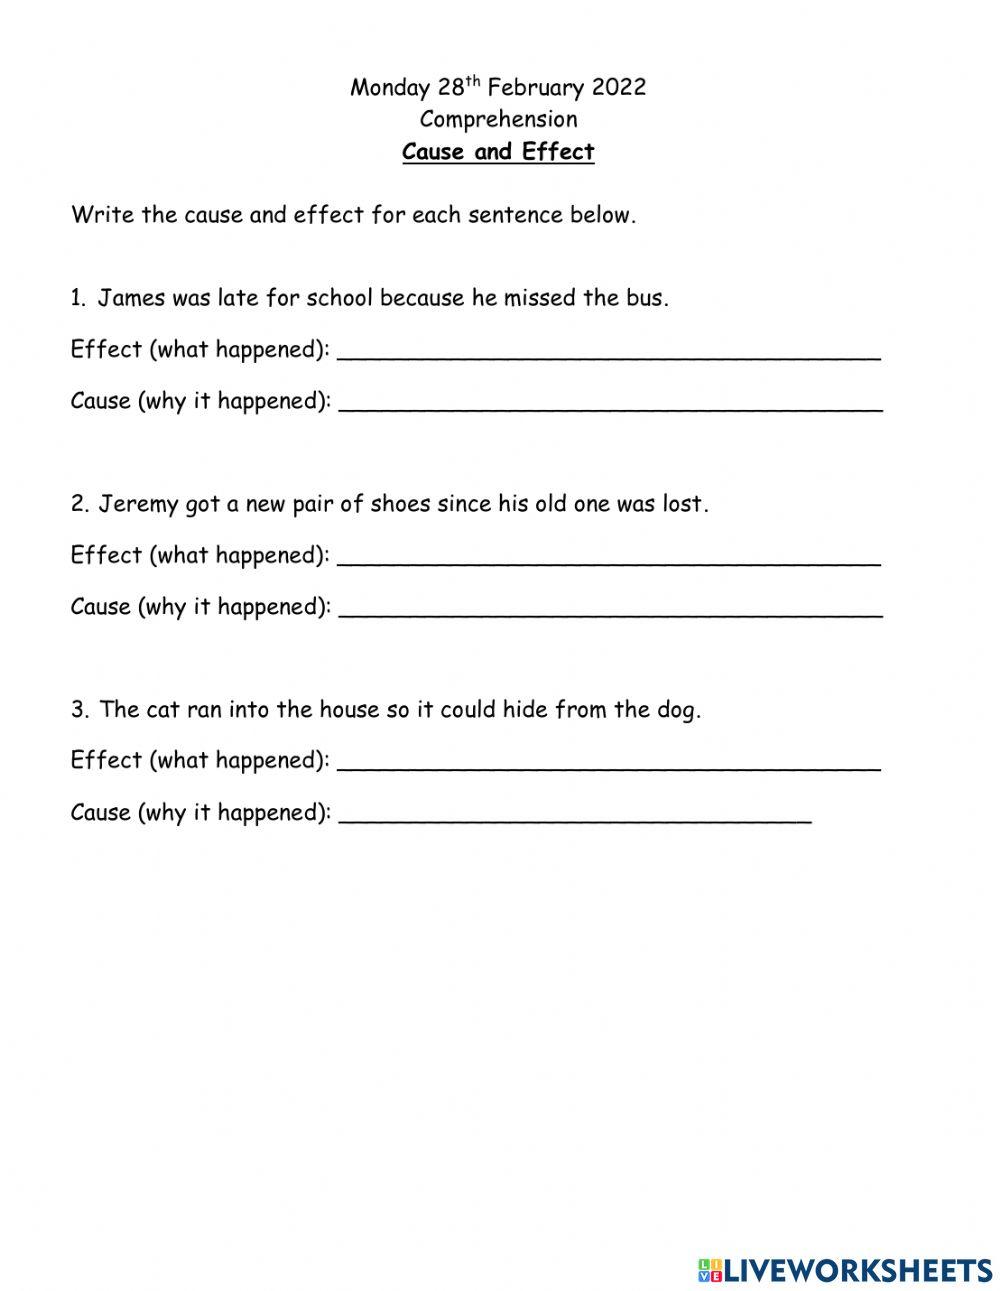 Cause and Effect-Worksheet 1